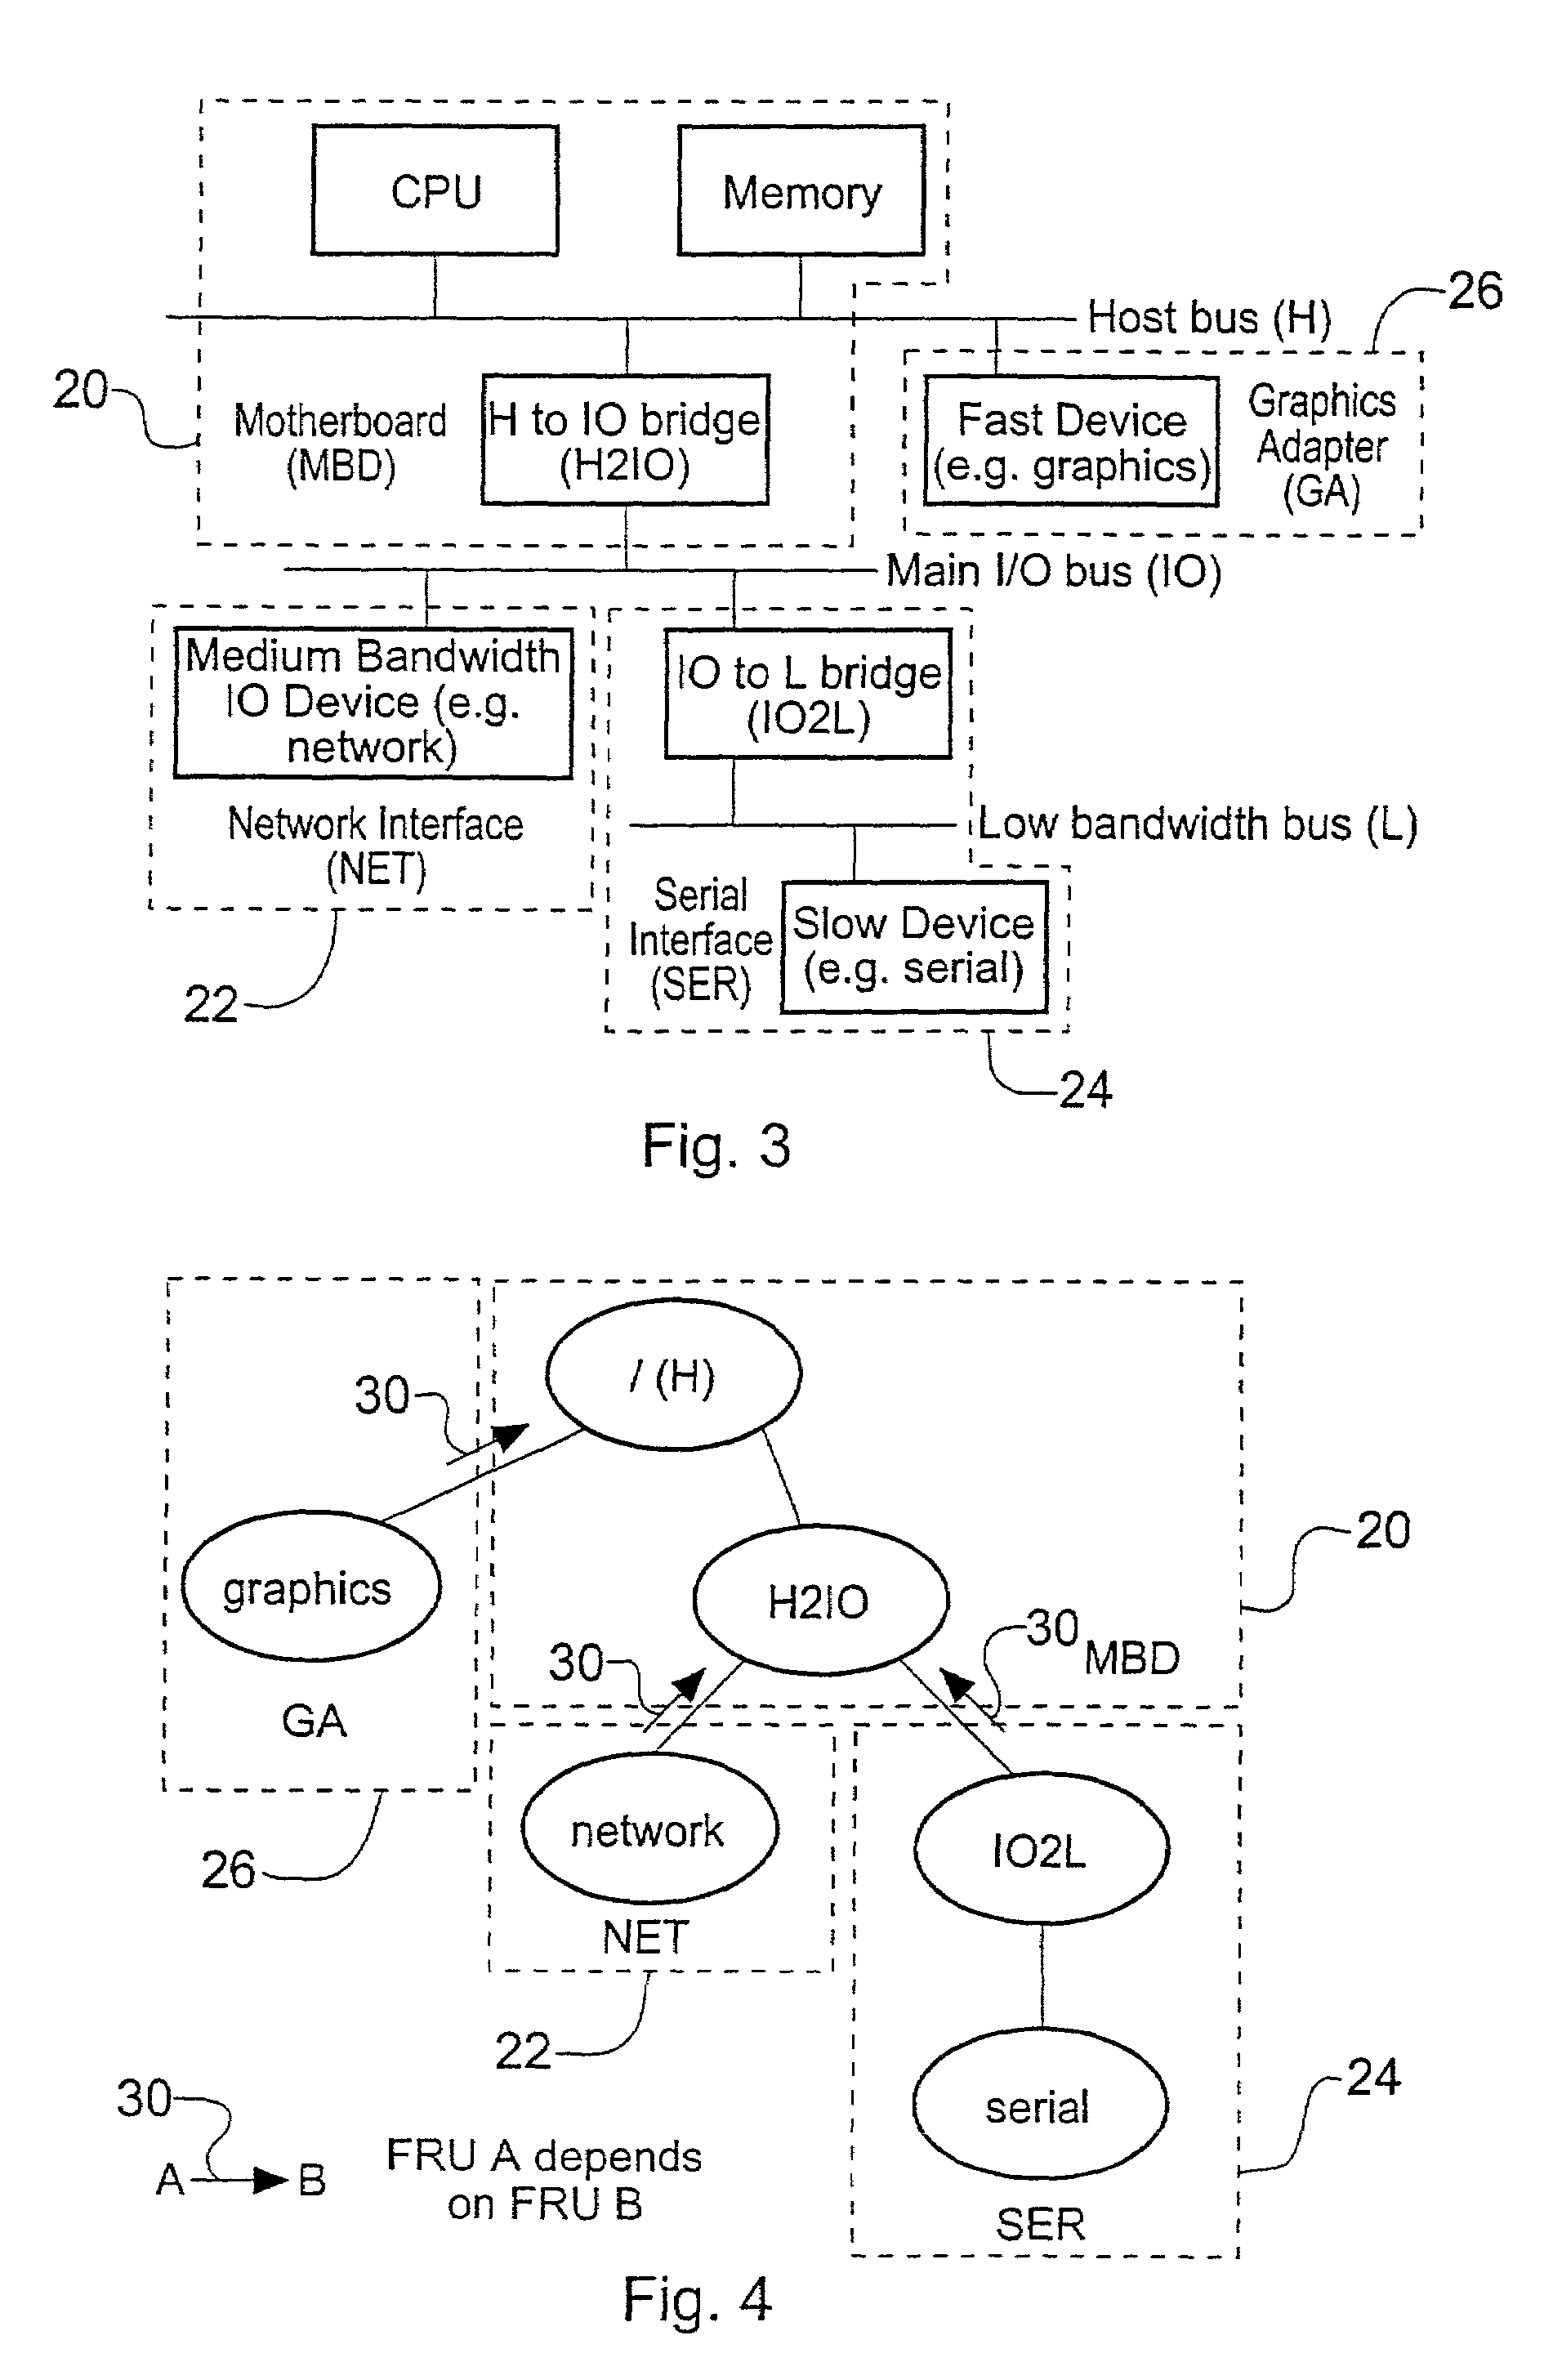 Method and apparatus for locating a faulty device in a computer system